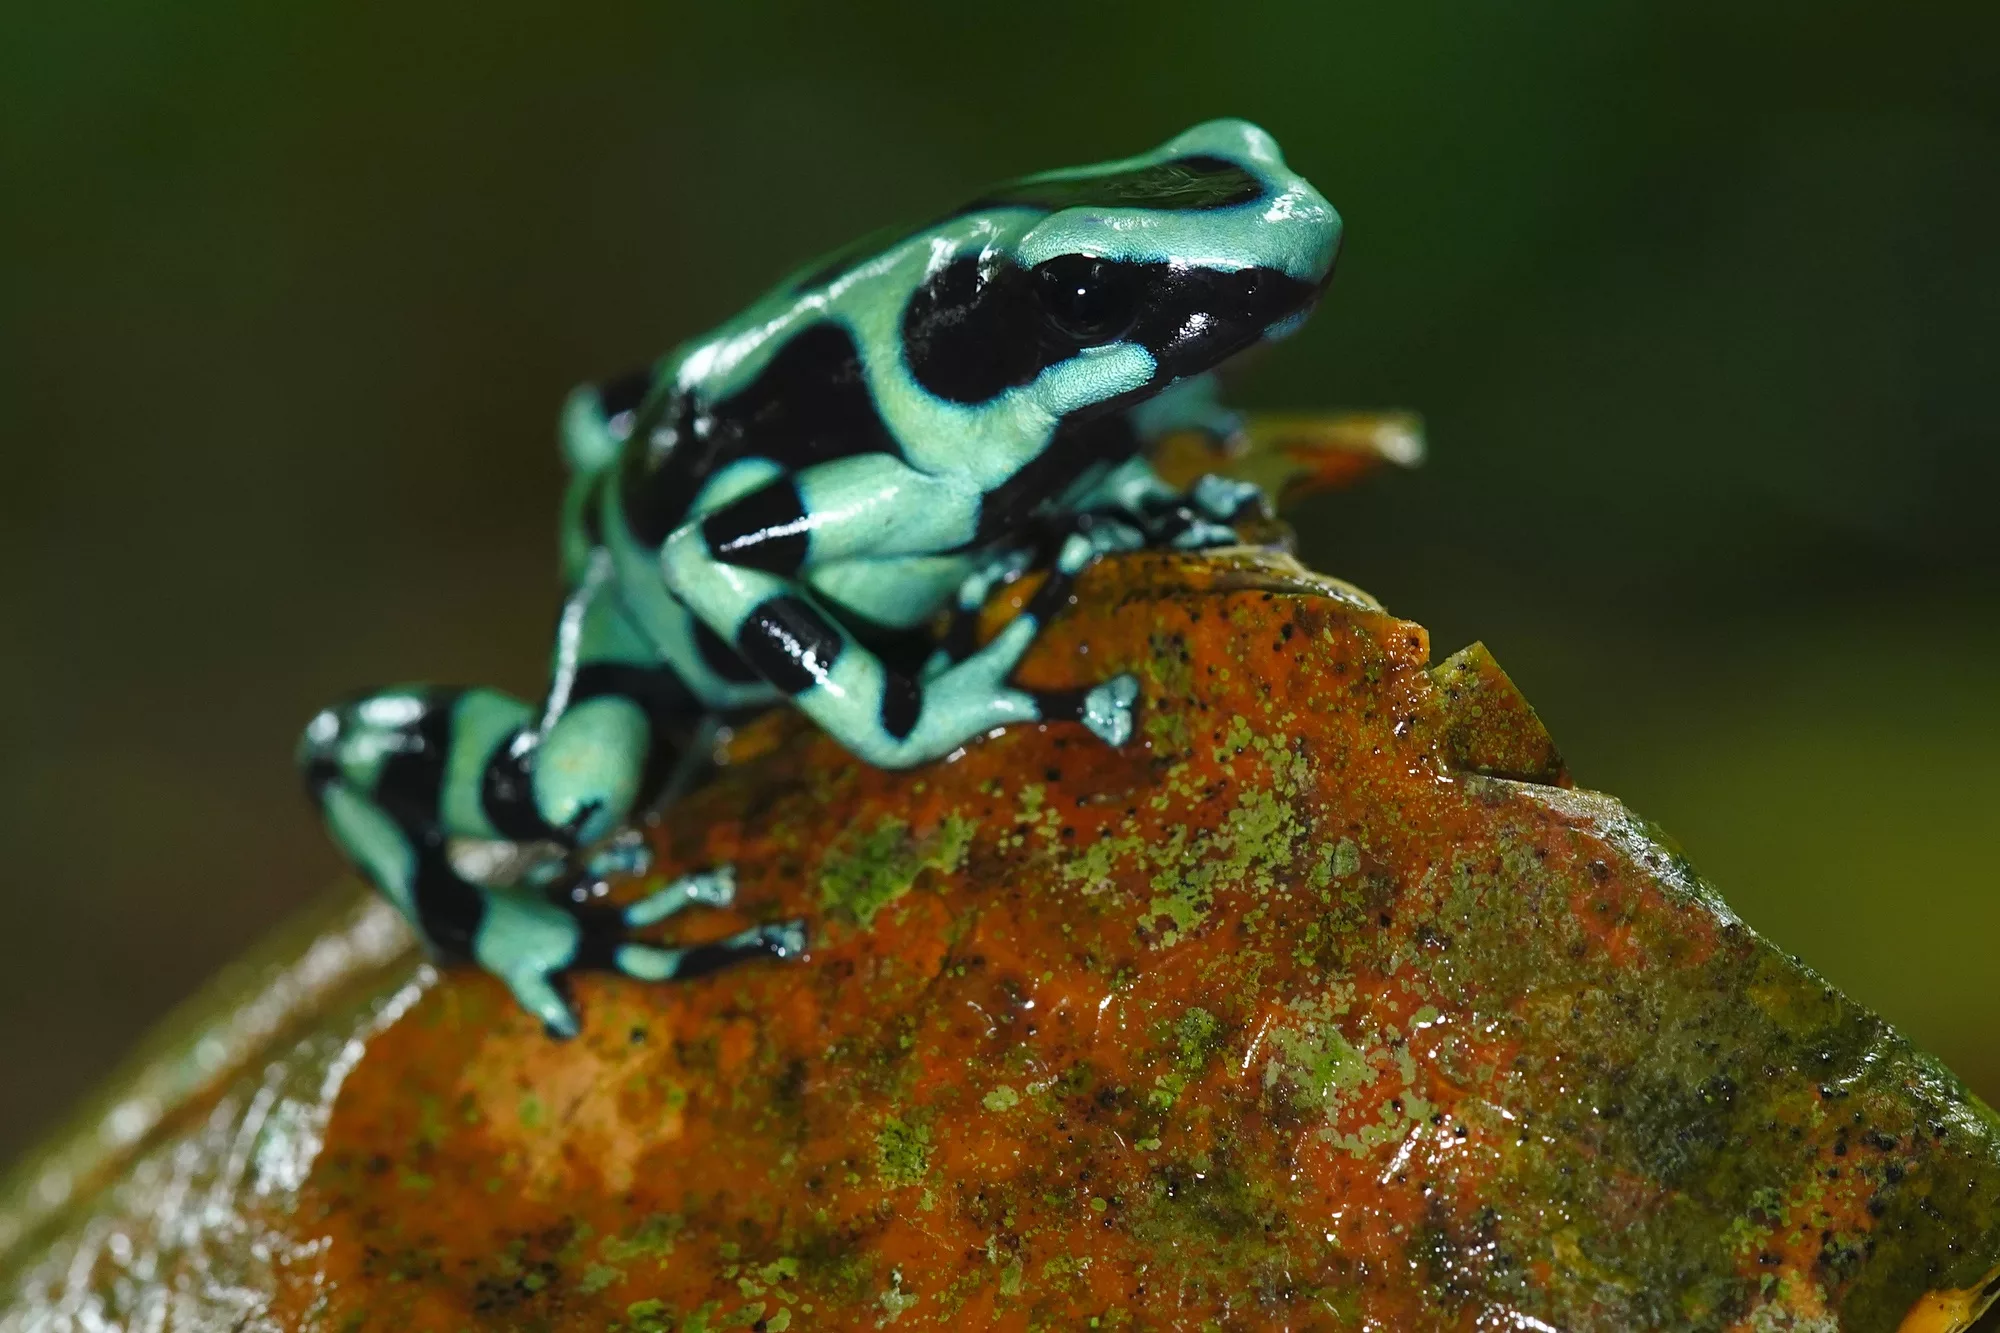 Costa Rica photo tour with Don Mammoser - green and black frog